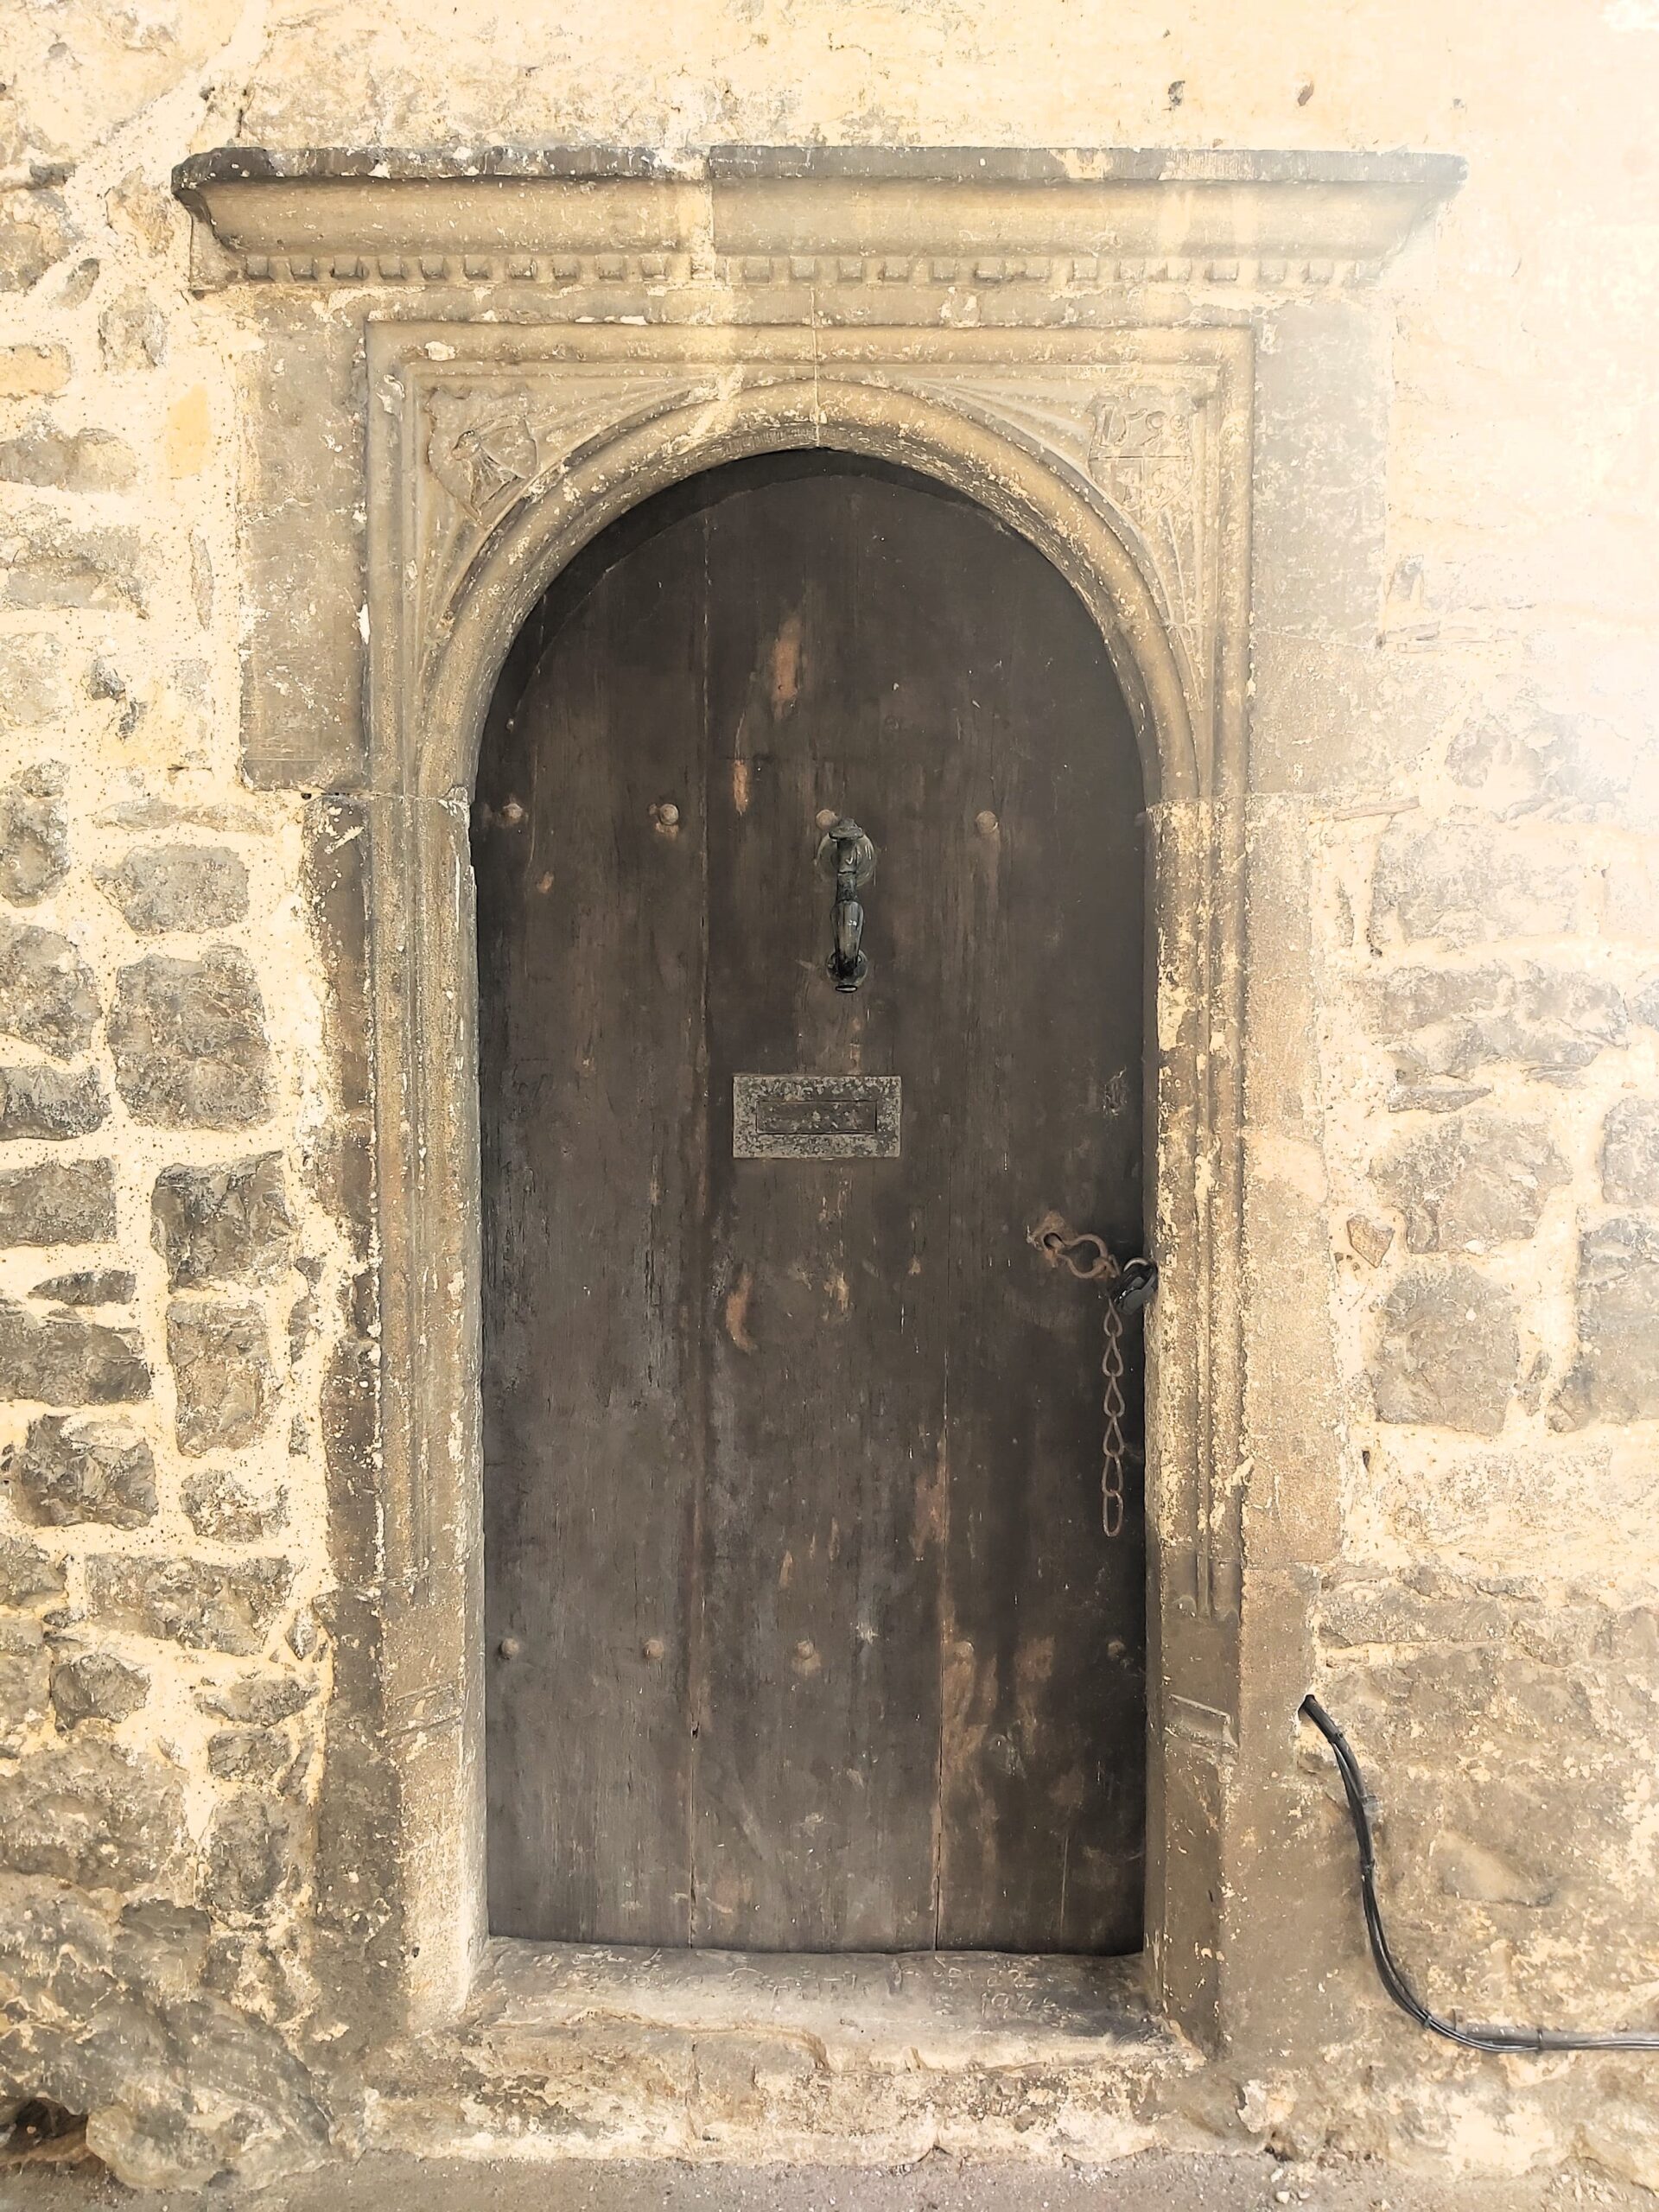 An old door in The Friars Aylesford Priory, Kent, England